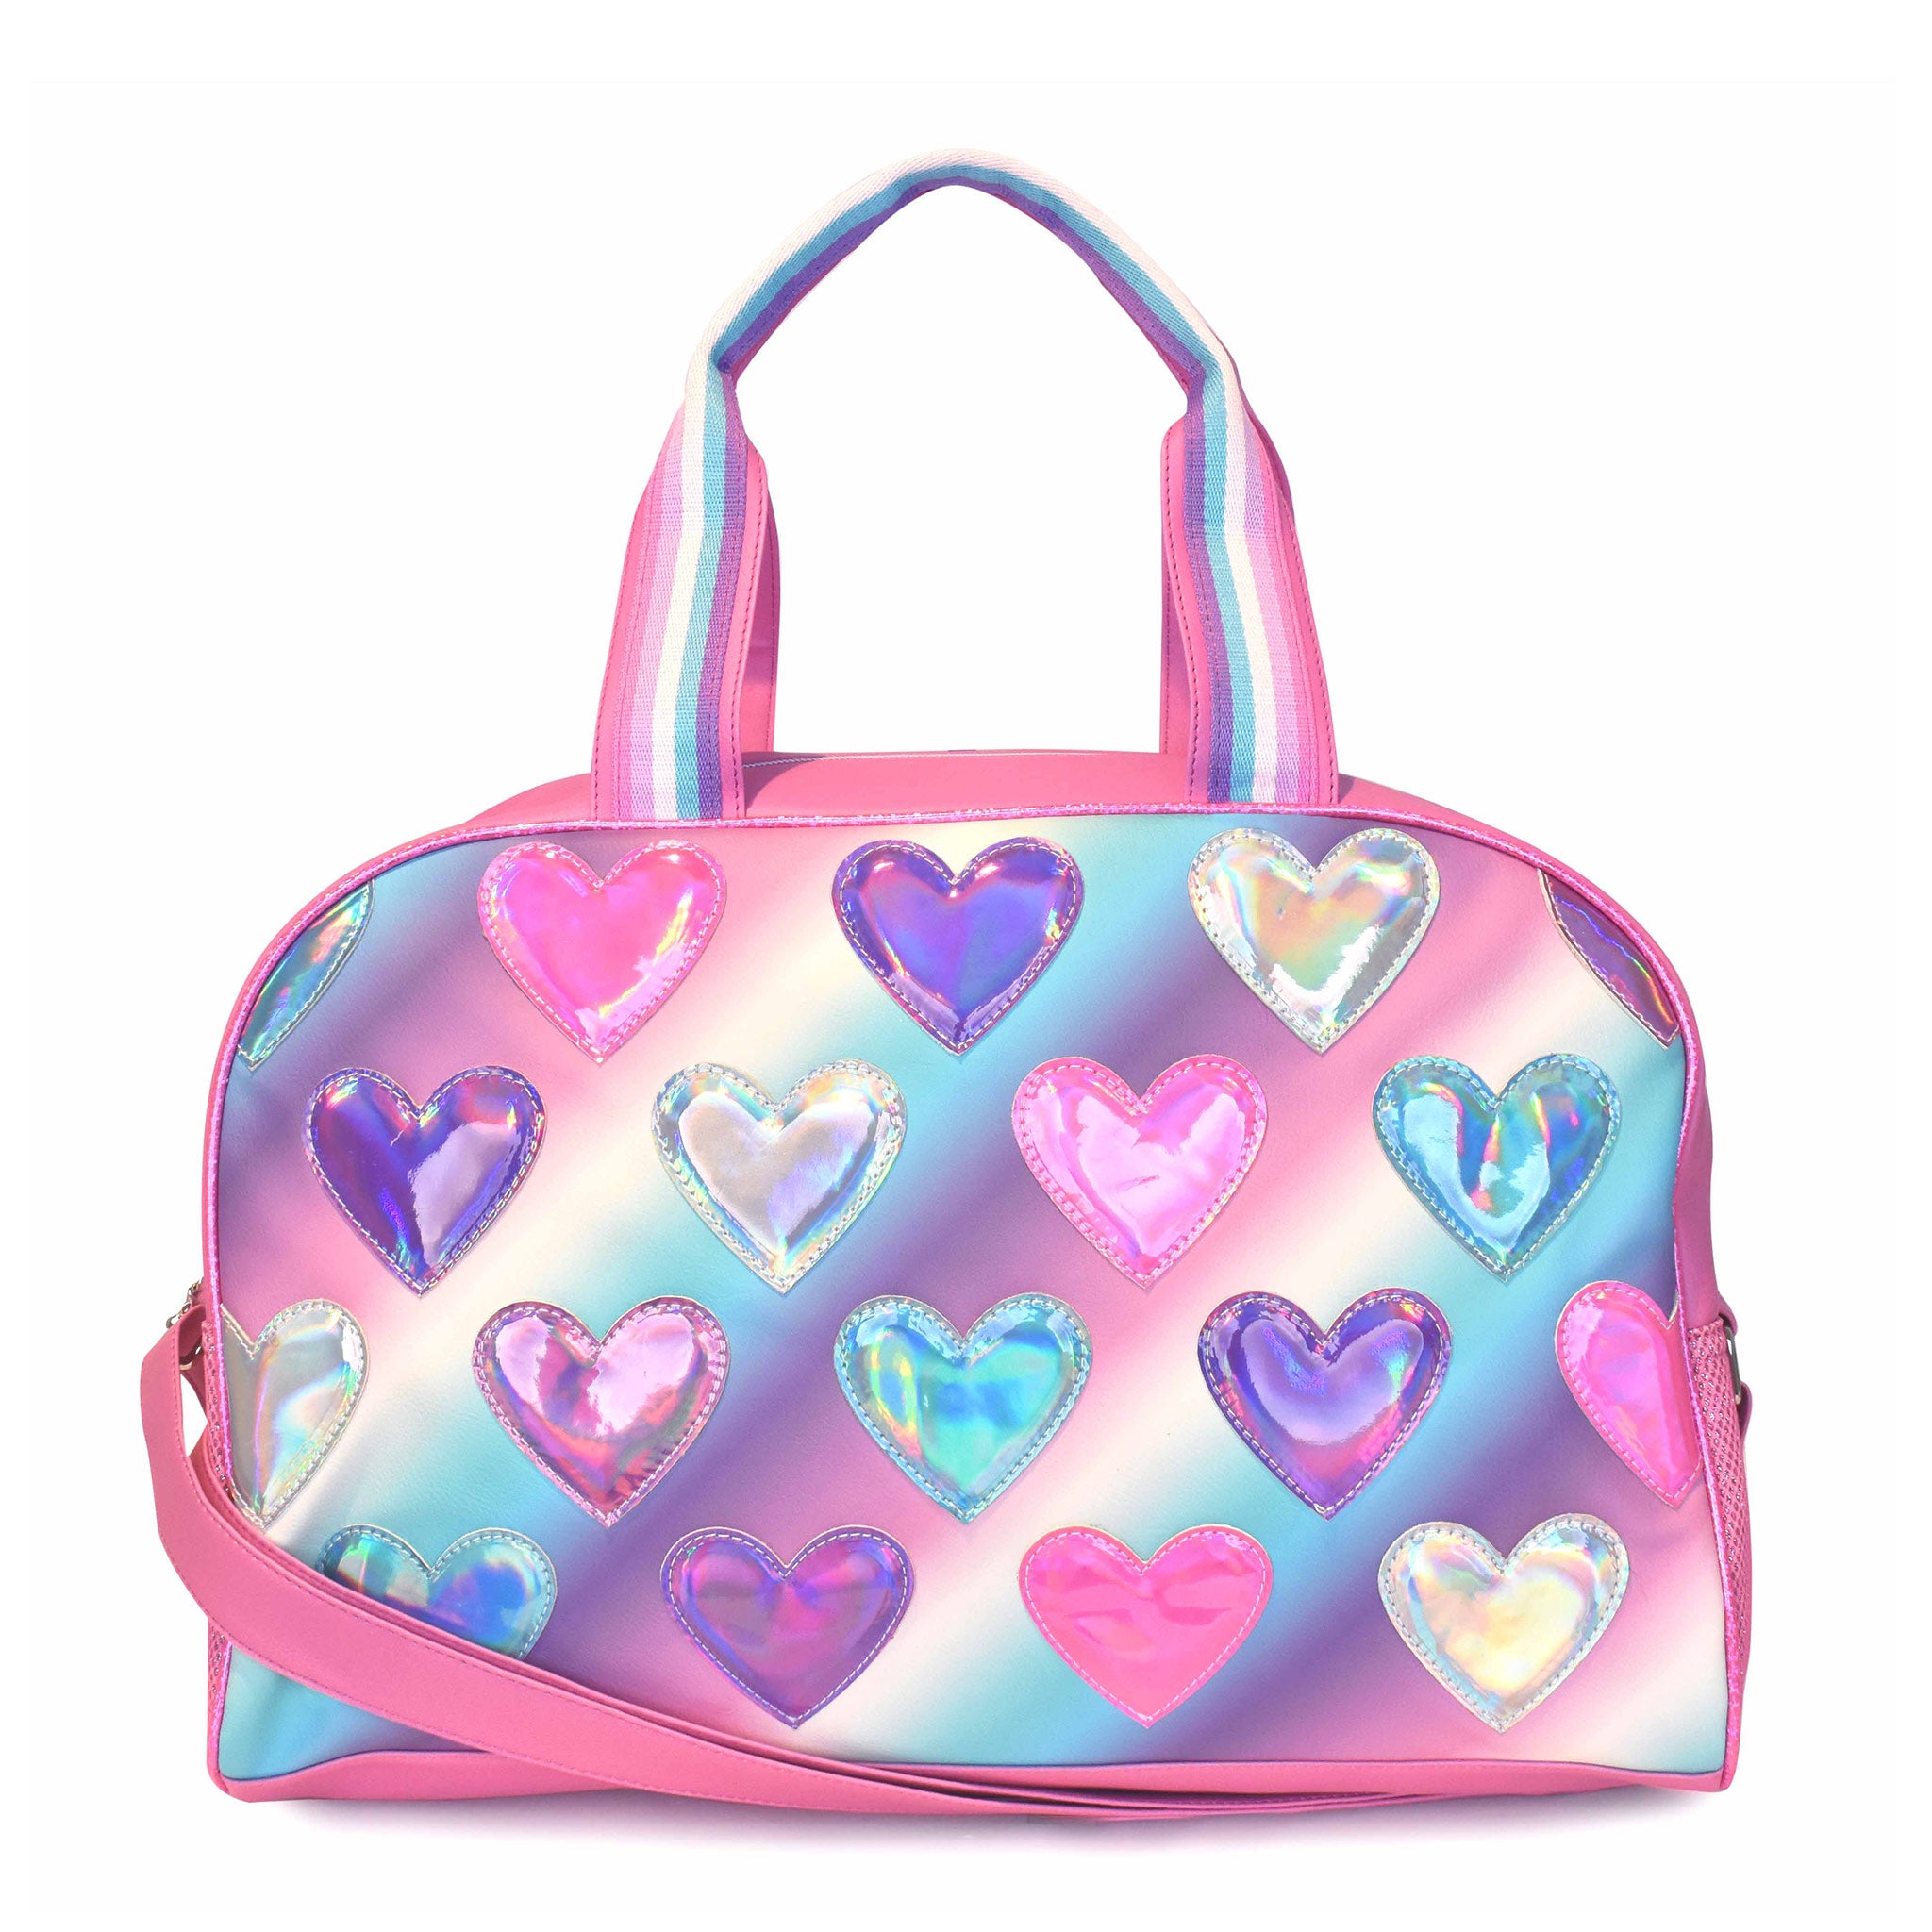 Front view of a pink, purple, and blue ombre large duffle bag with metallic heart patches